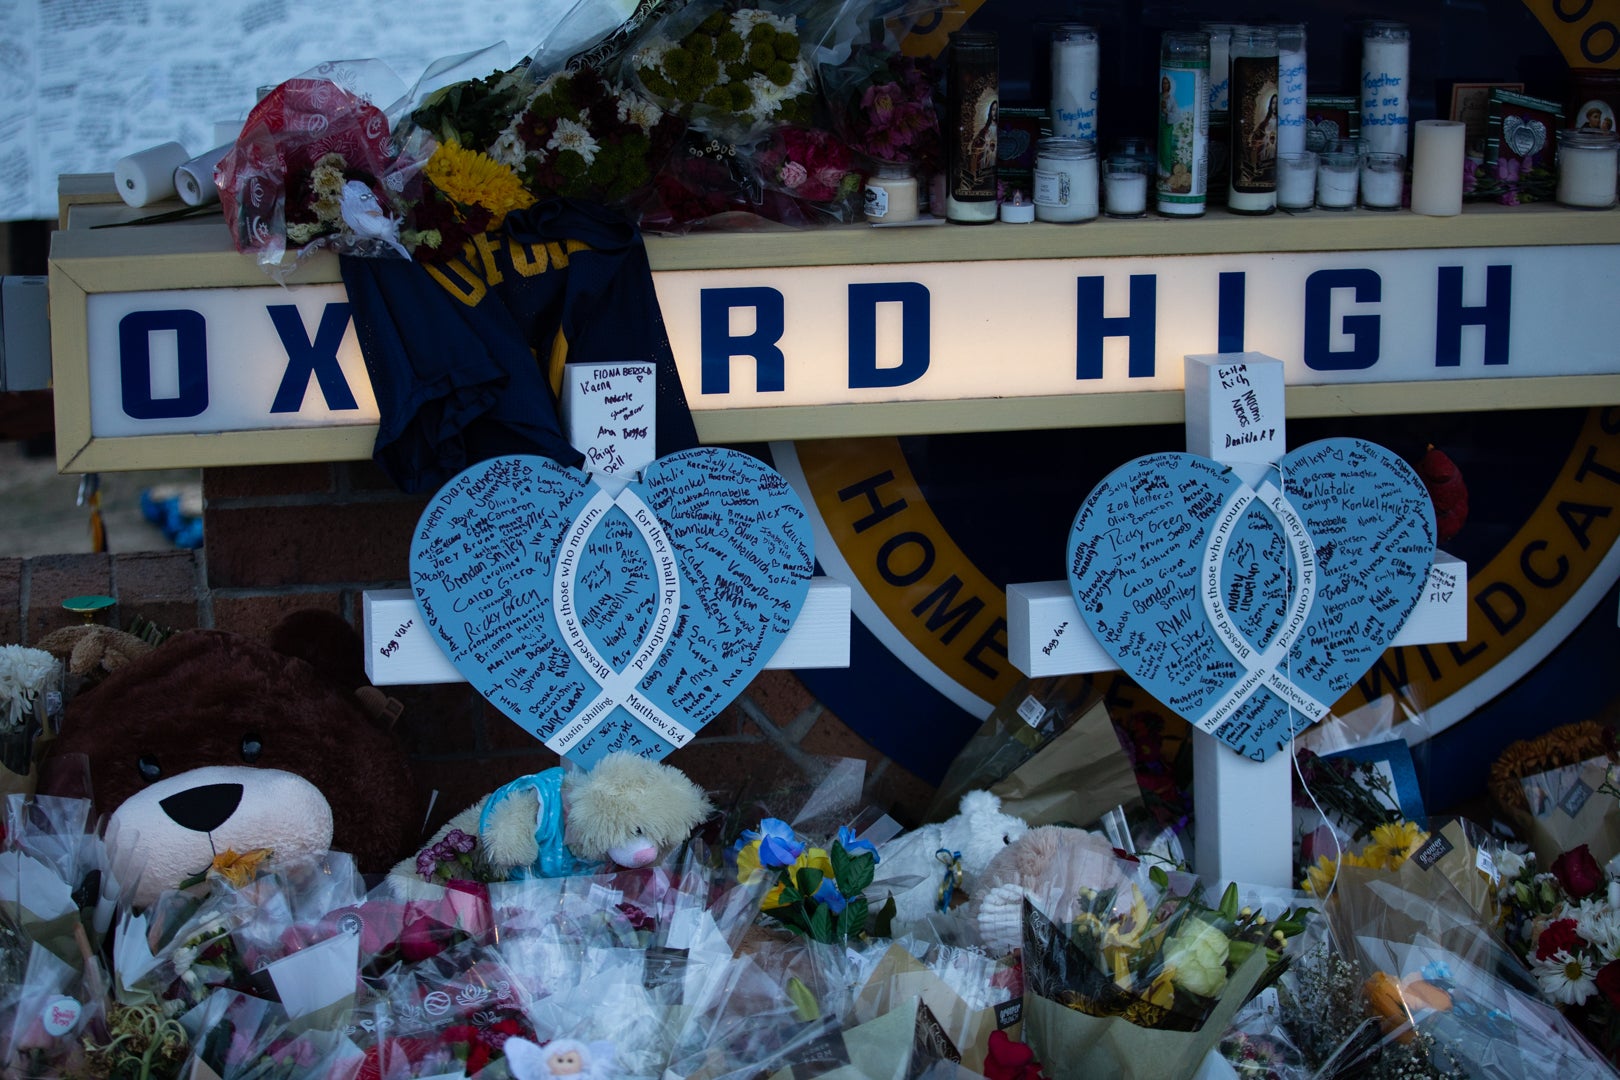 A memorial outside Oxford High School in Michigan which was the site of a mass shooting on 30 November